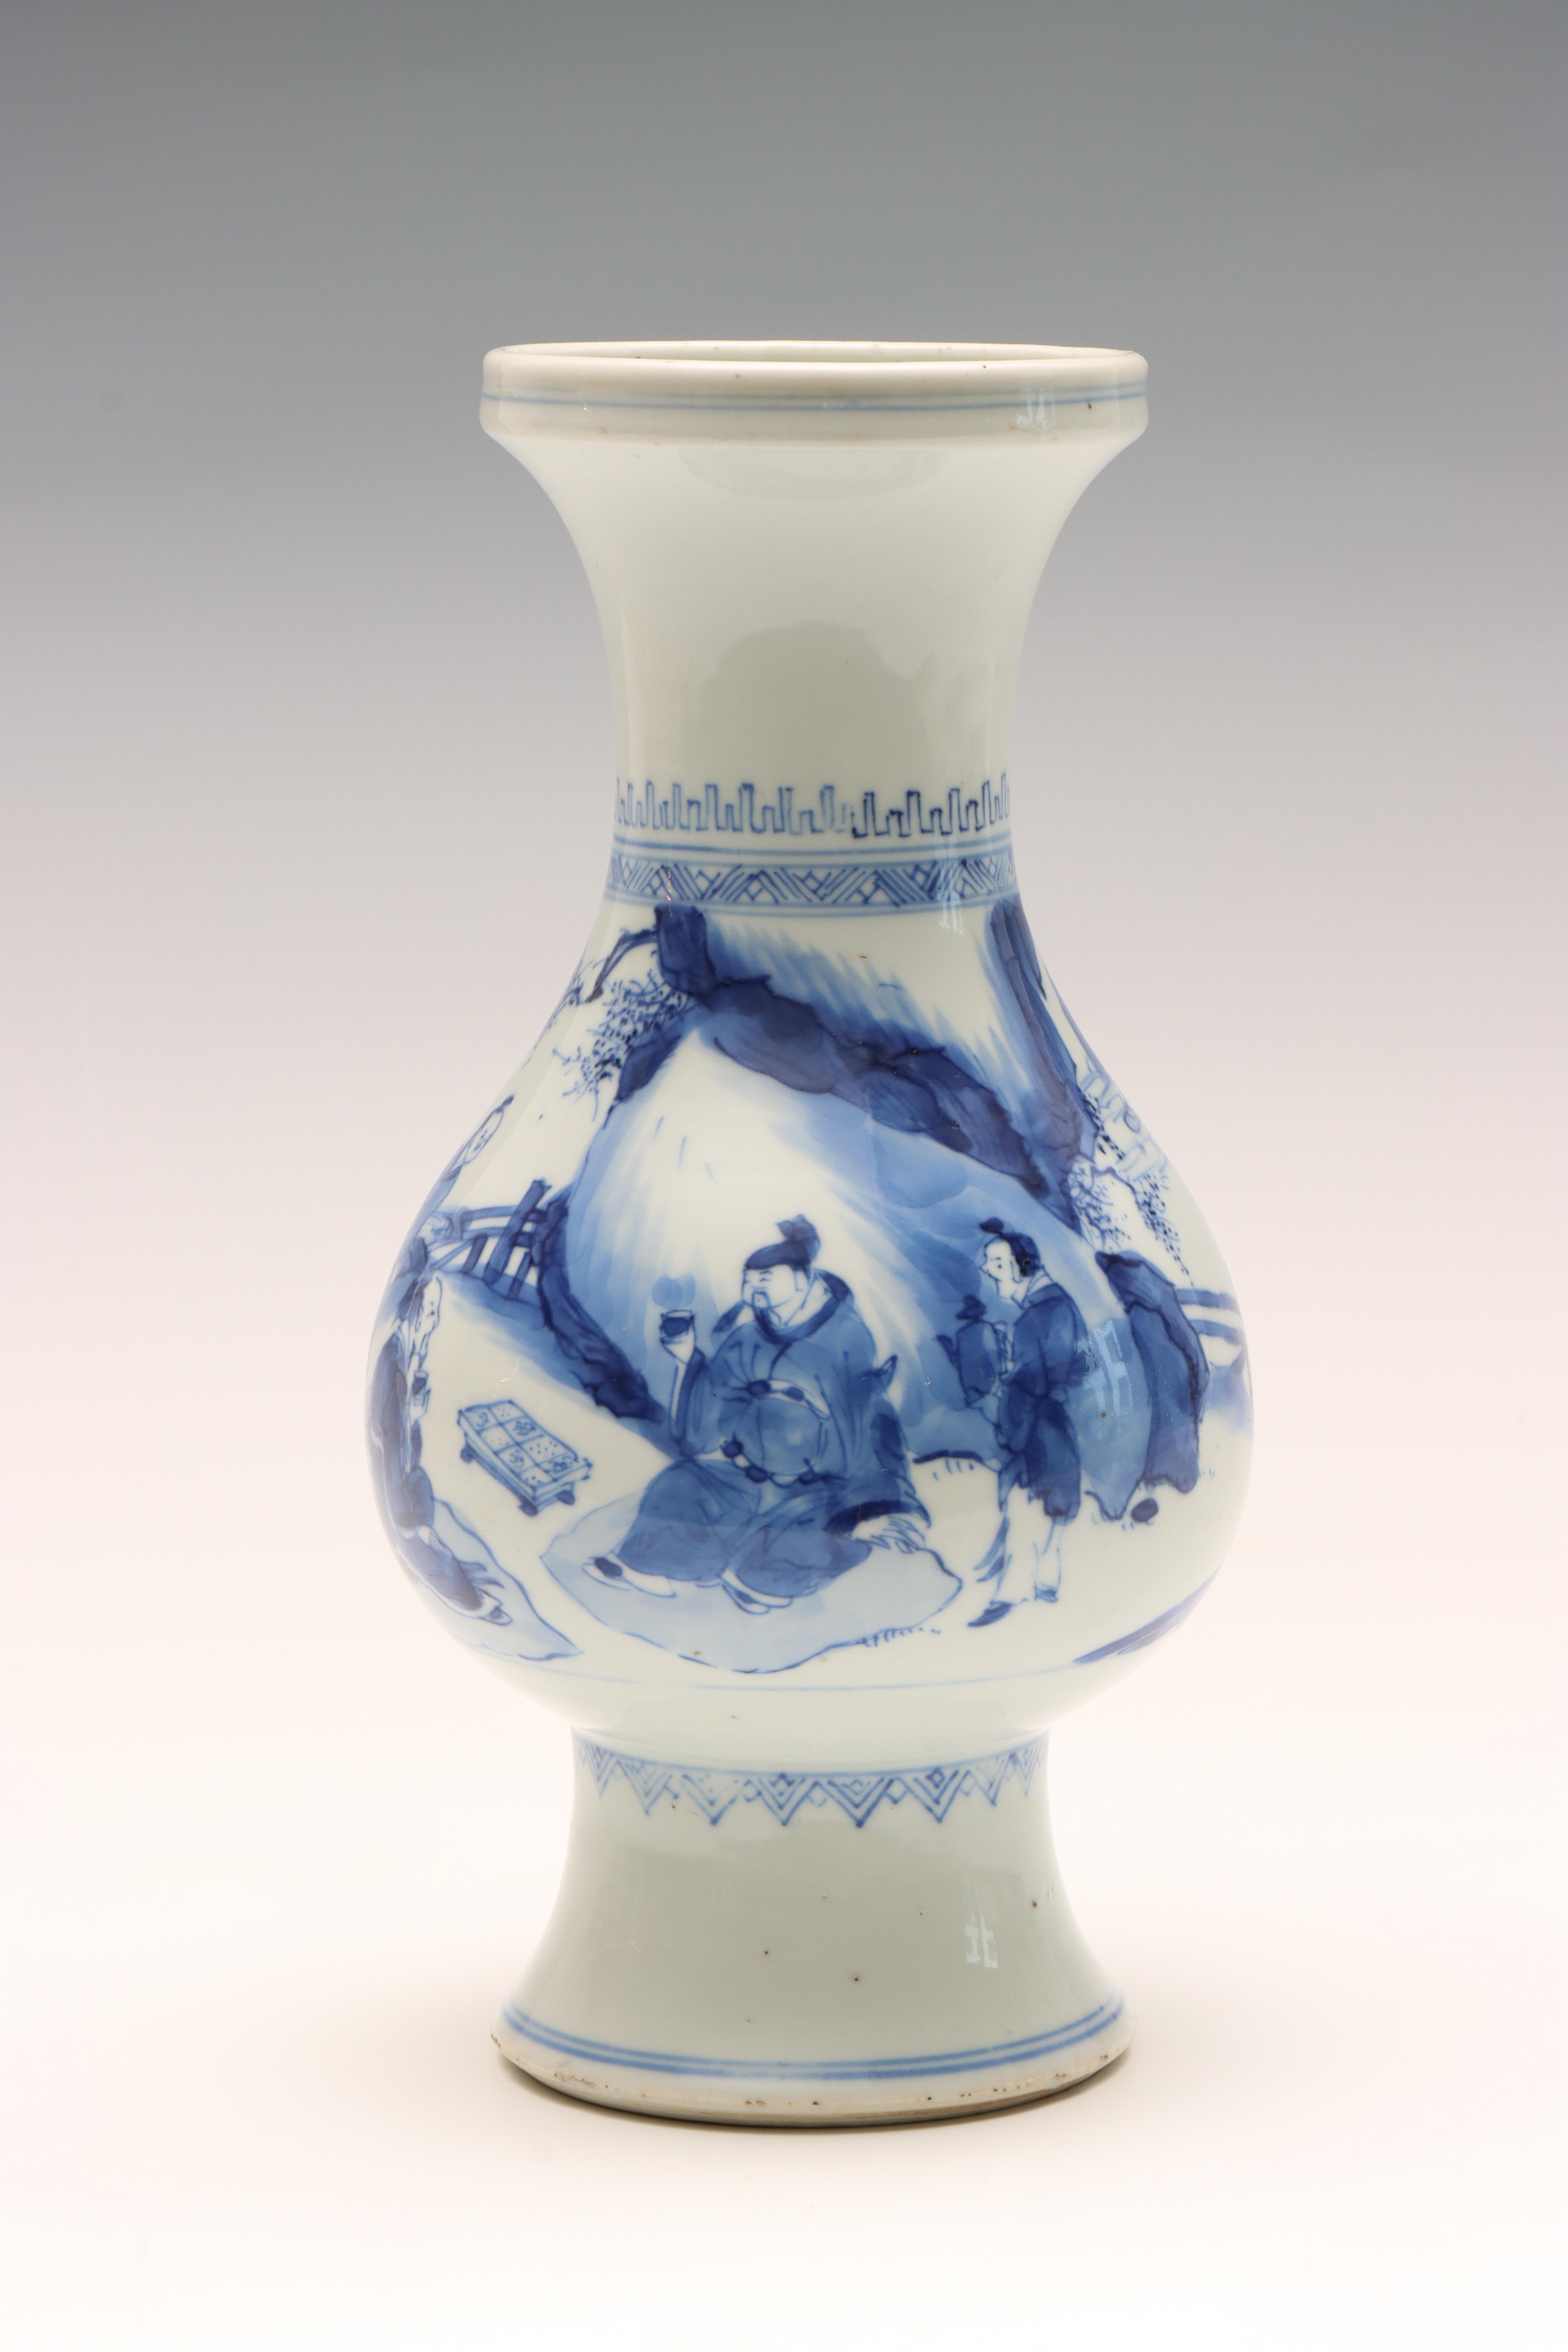 China, blue and white Transitional porcelain 'scholars' vase, mid-17th century, - Image 8 of 16